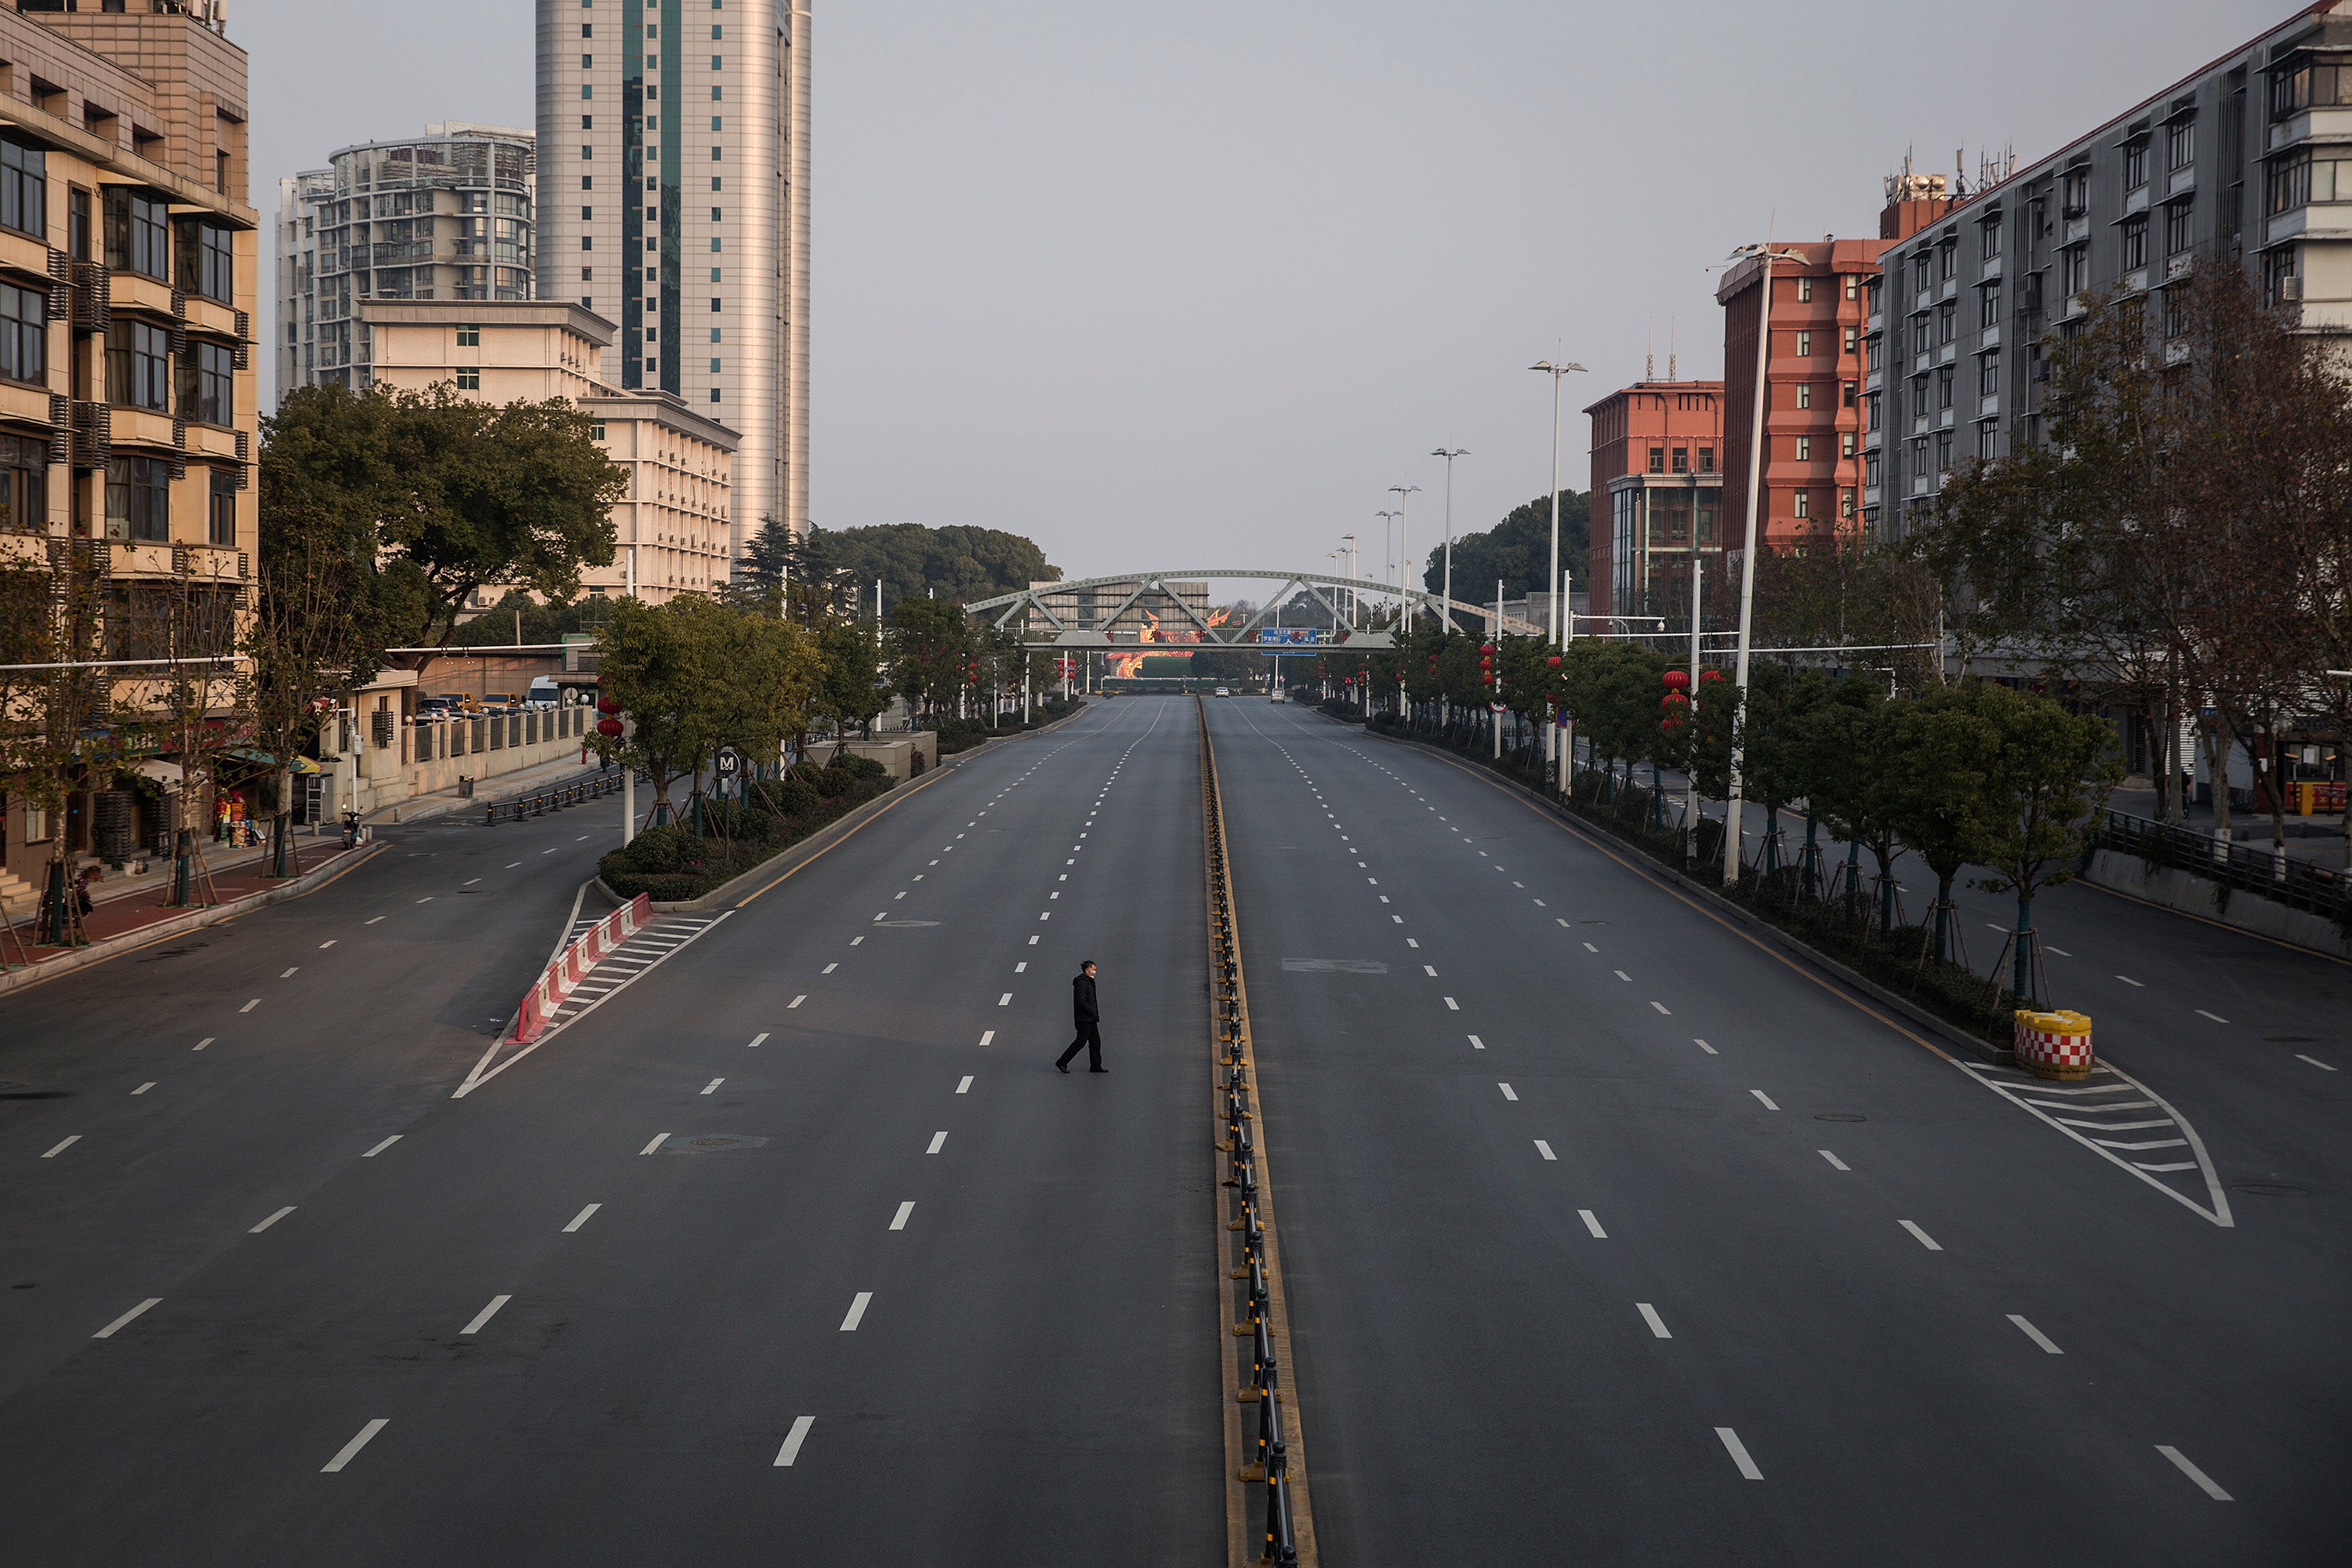 The city of Wuhan during lockdown&nbsp;